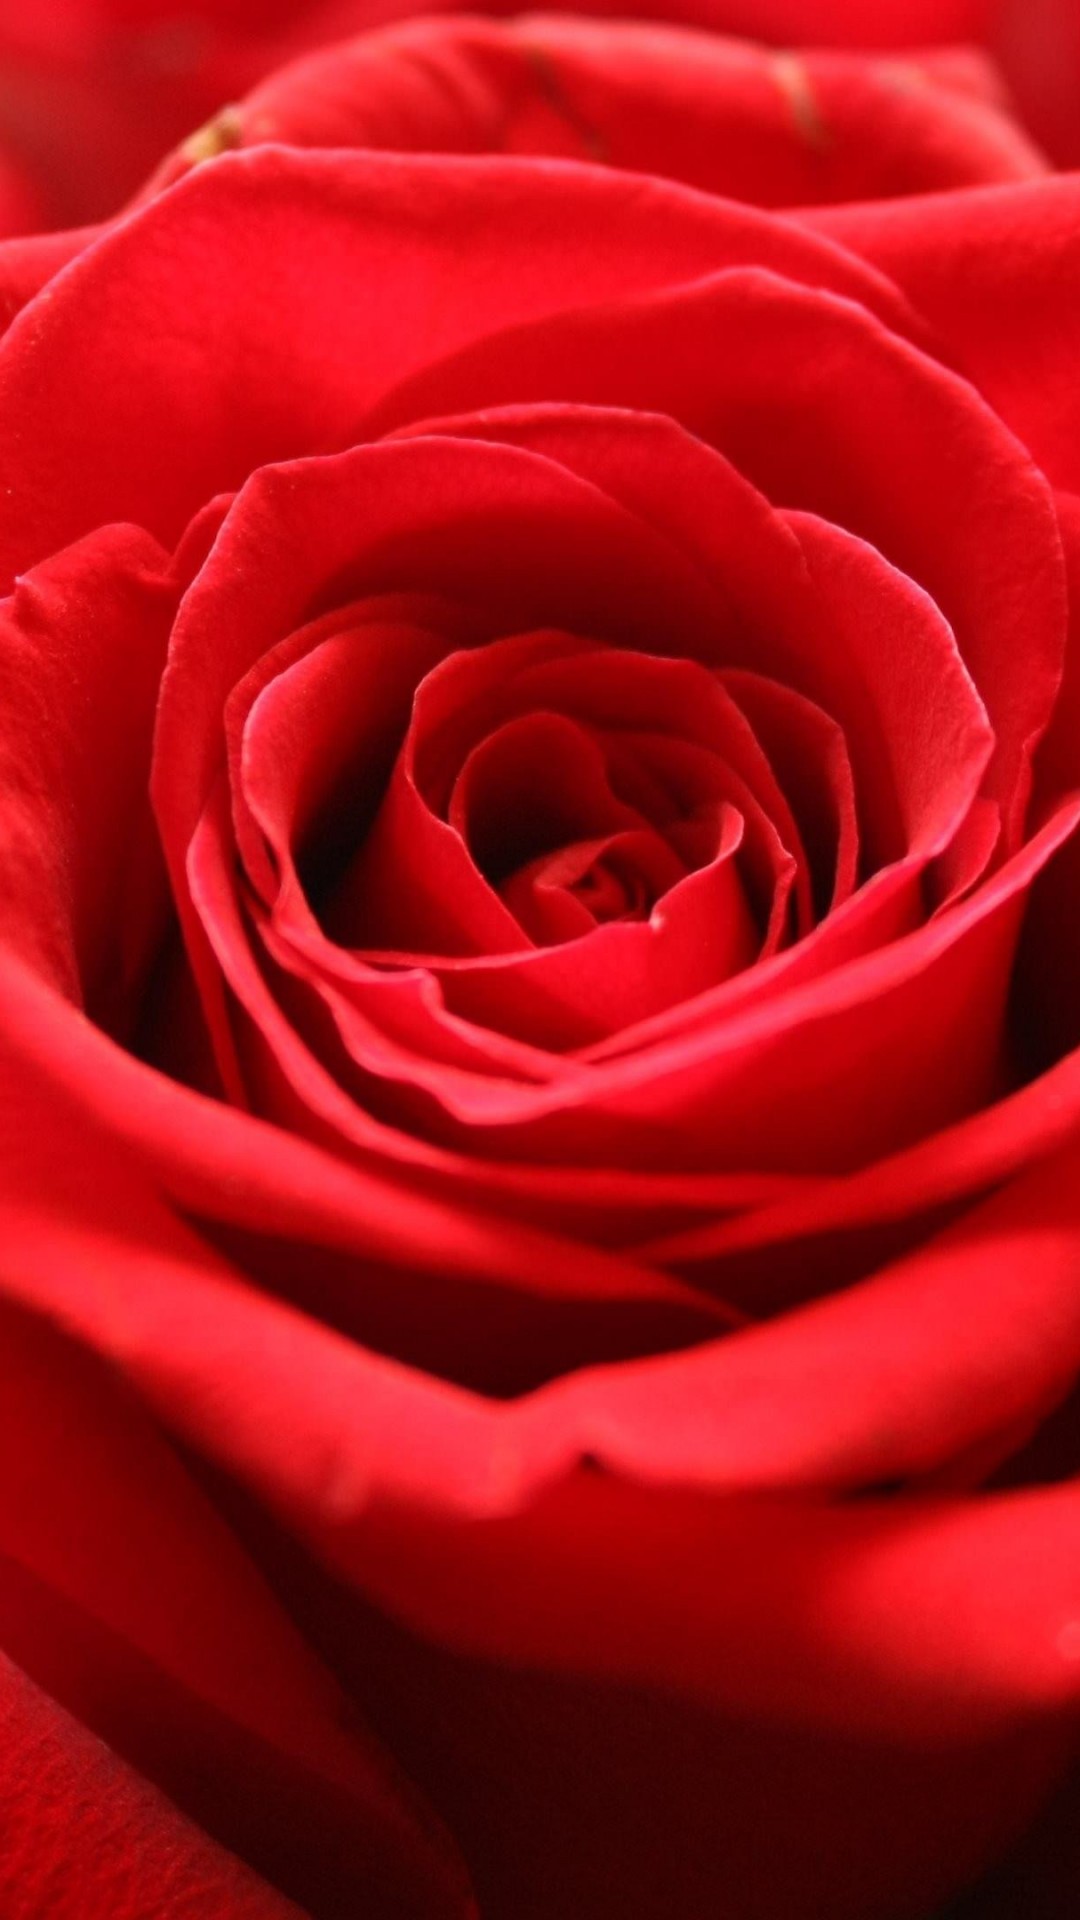 Red Rose Wallpaper for SAMSUNG Galaxy Note 3